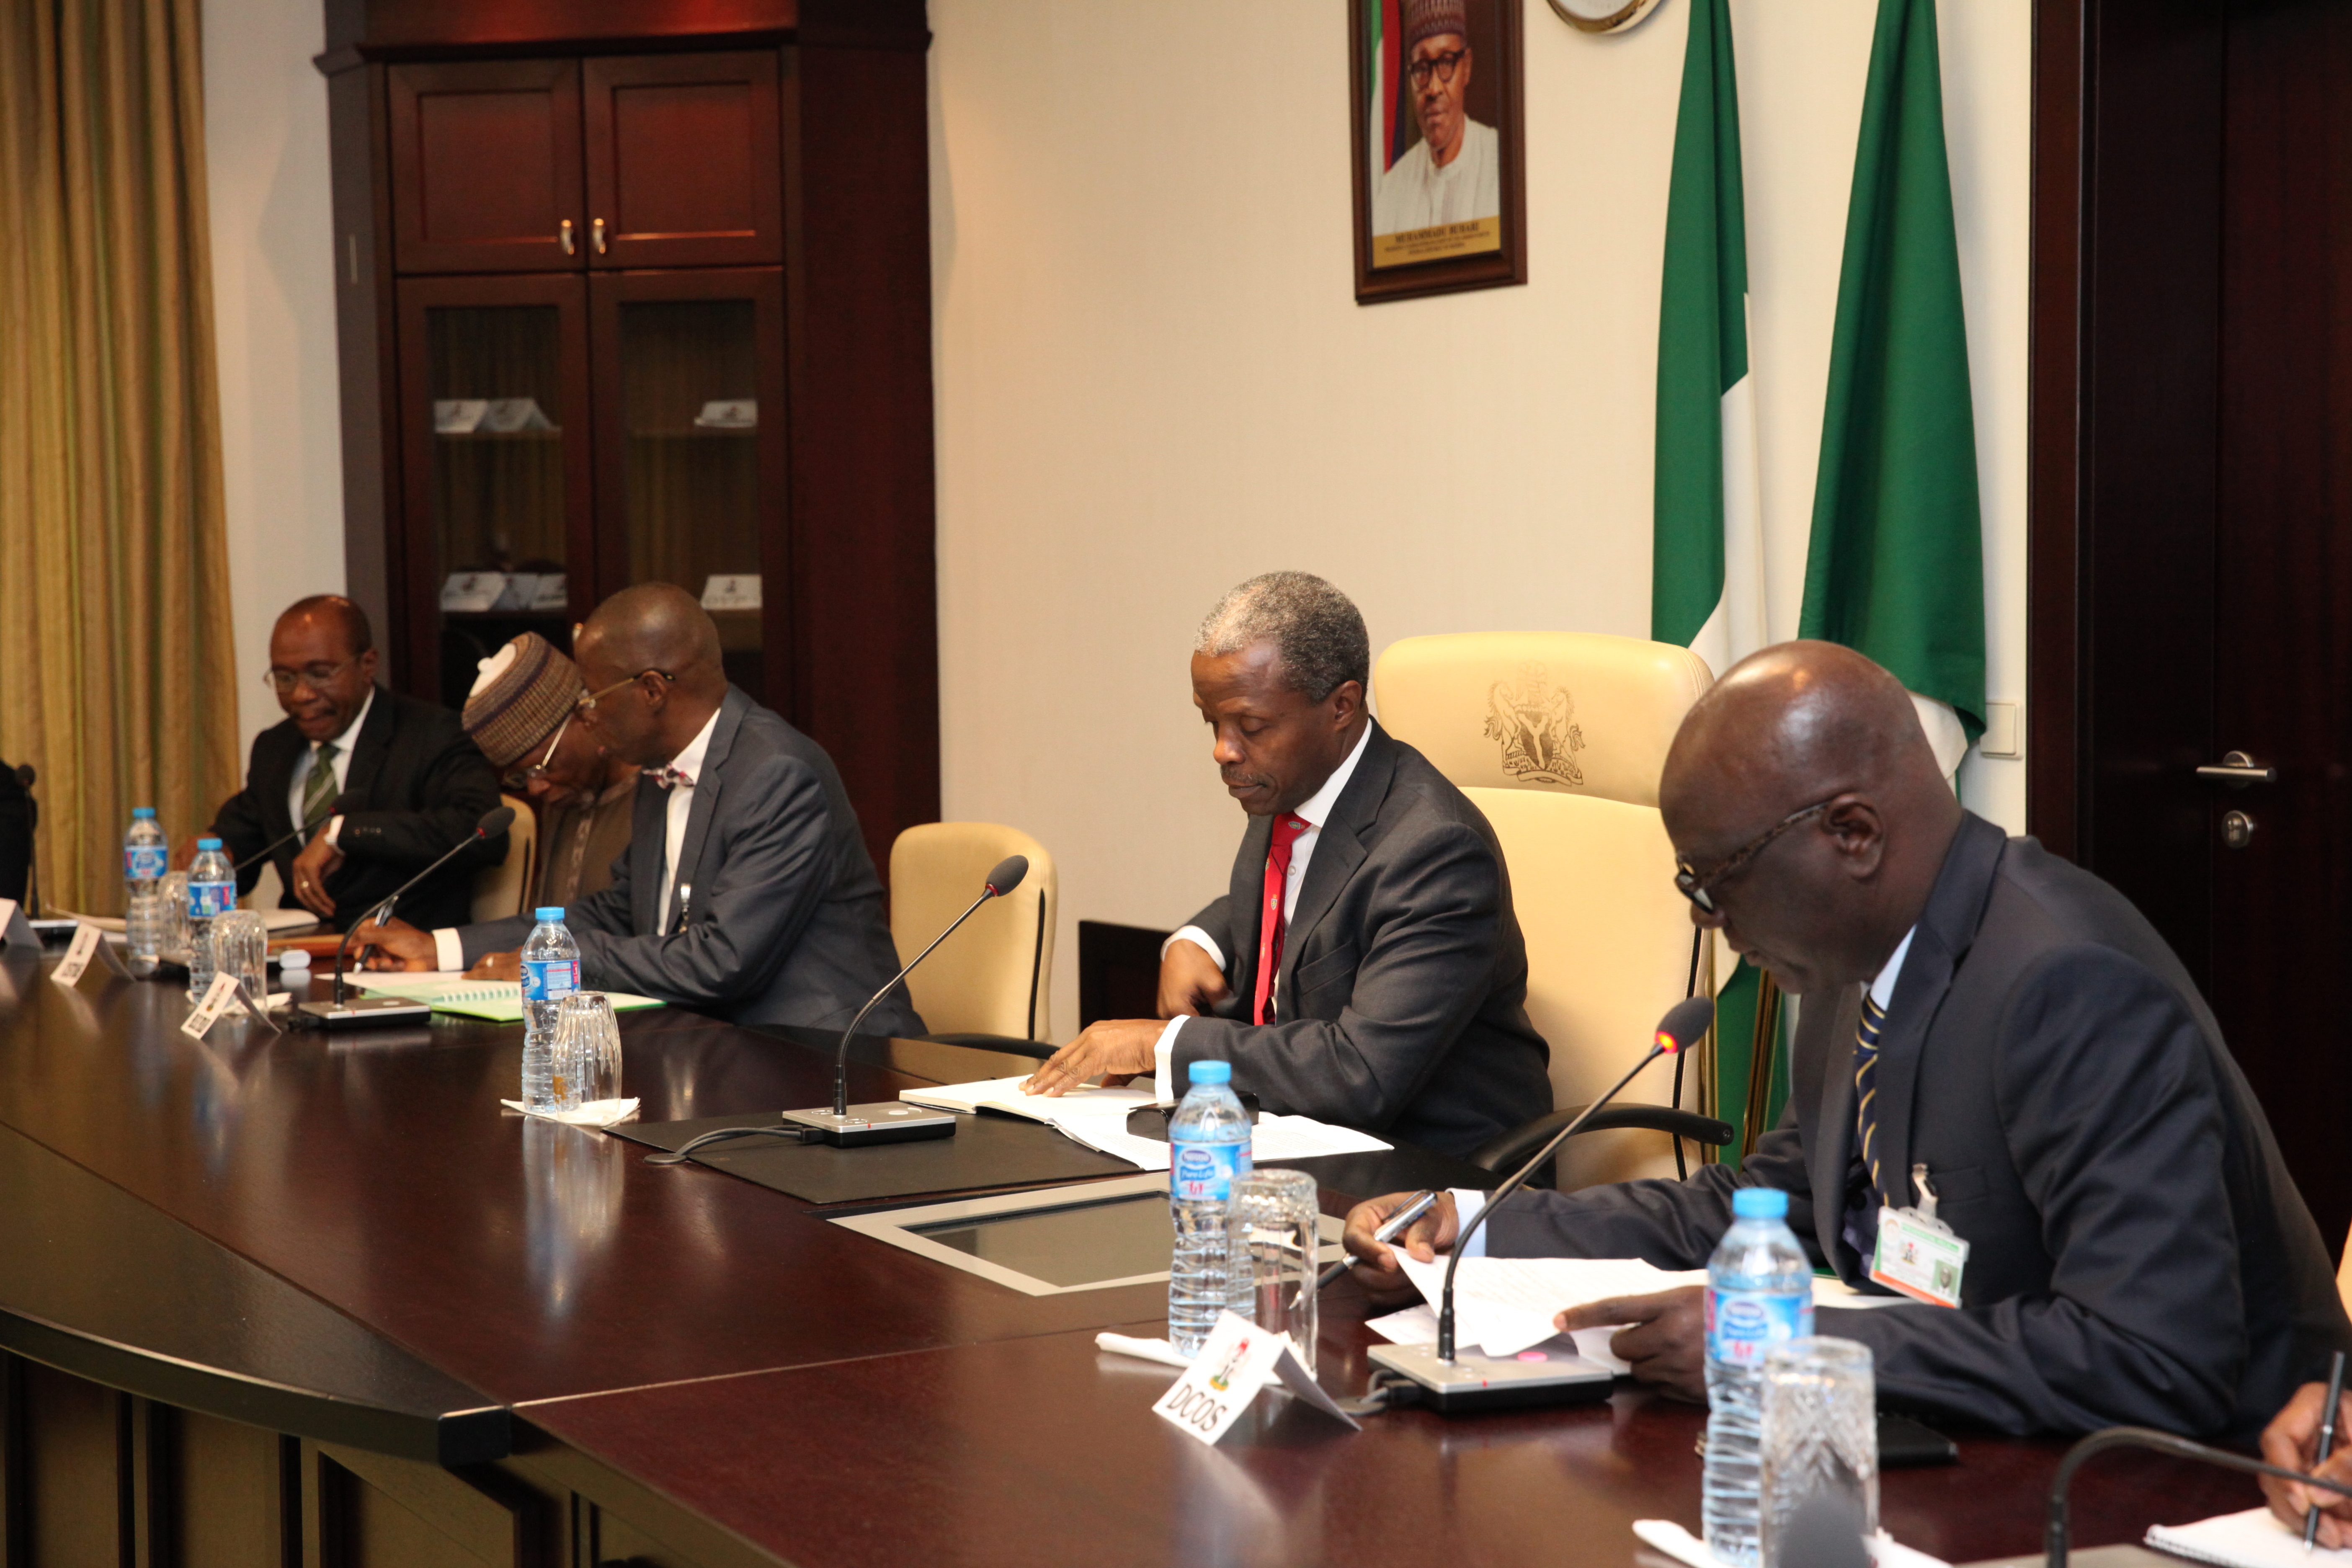 VP Osinbajo Has Meetings With Revenue Generating Agencies, NNPC, CBN, FIRS And Others On 16/09/2015